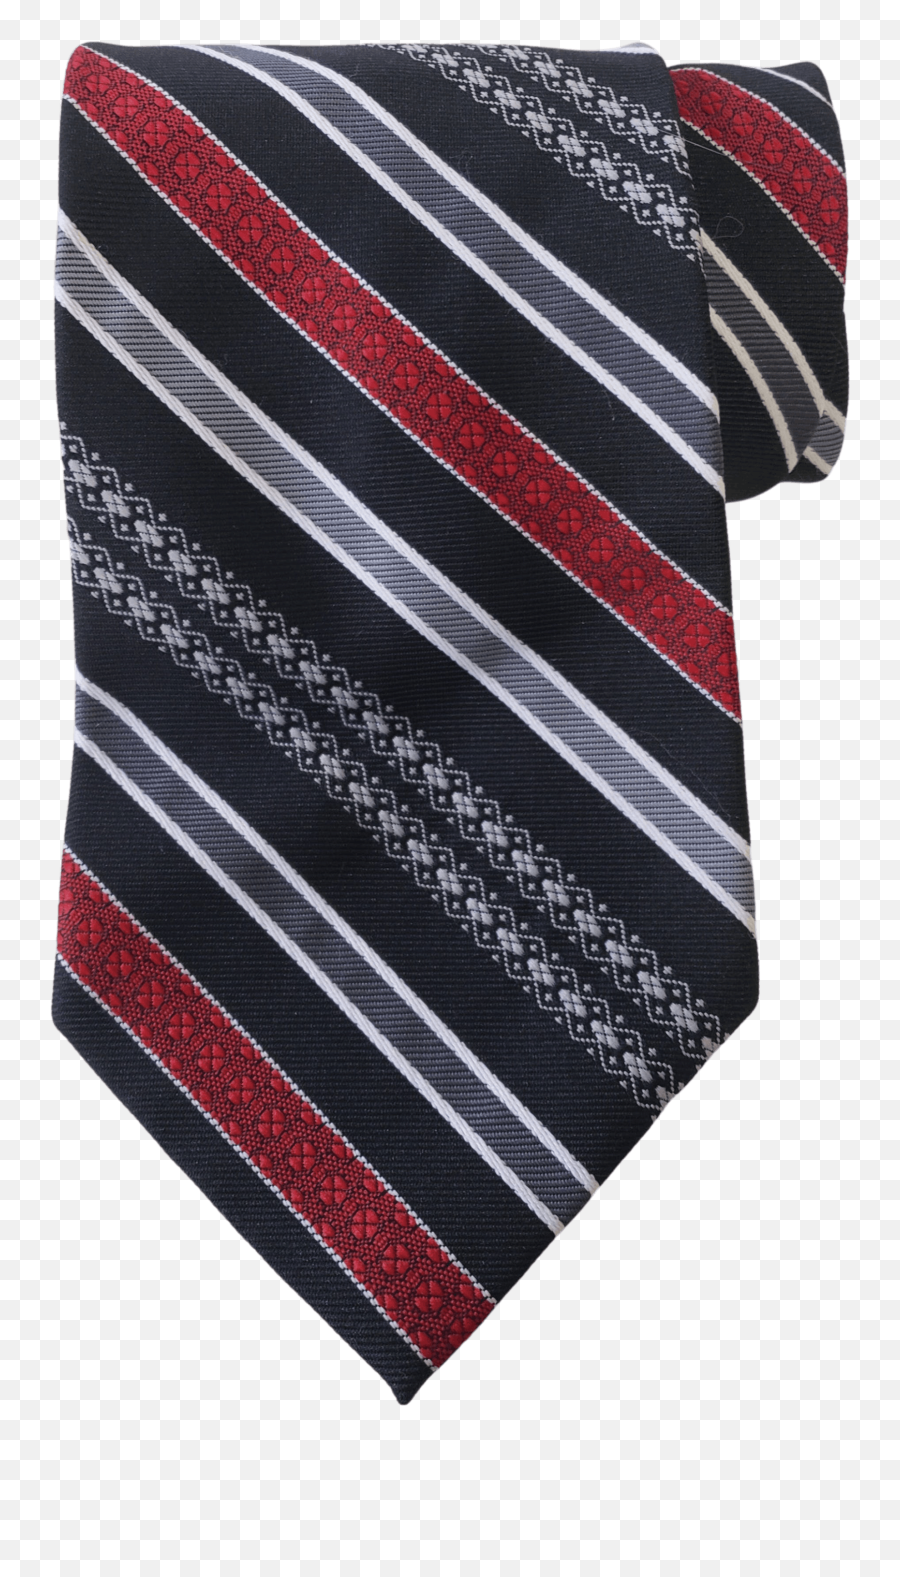 Vintage Black Tie With Gray And Red Diagonal Stripes By Emoji,Diagonal Stripes Png